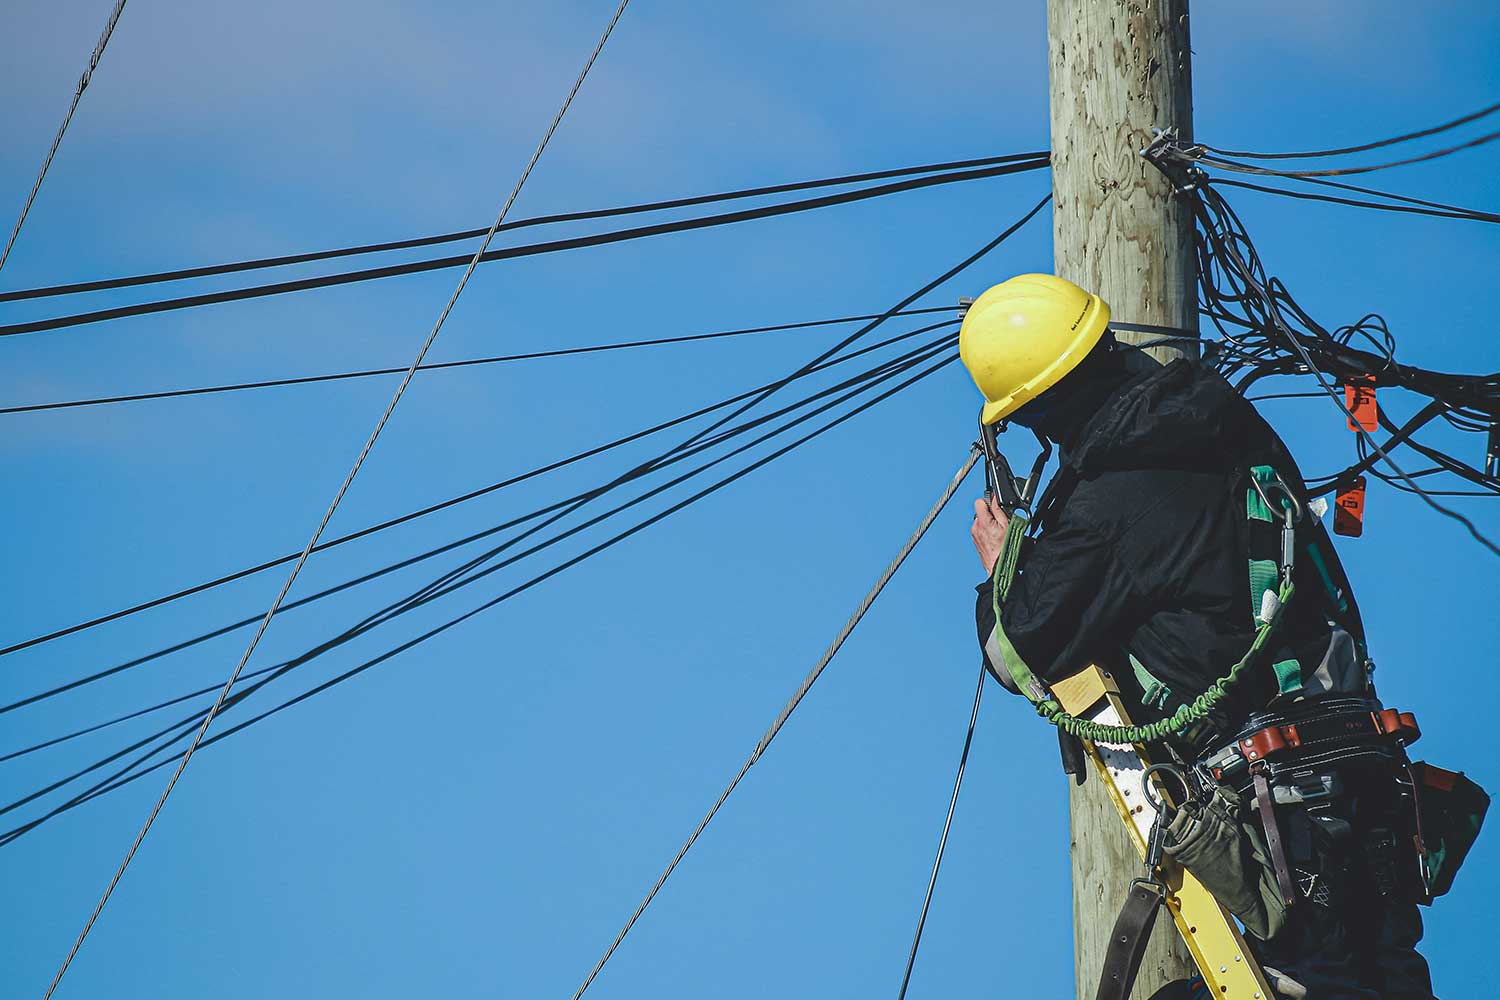 Comments to FERC on Electric Grid Resilience Order